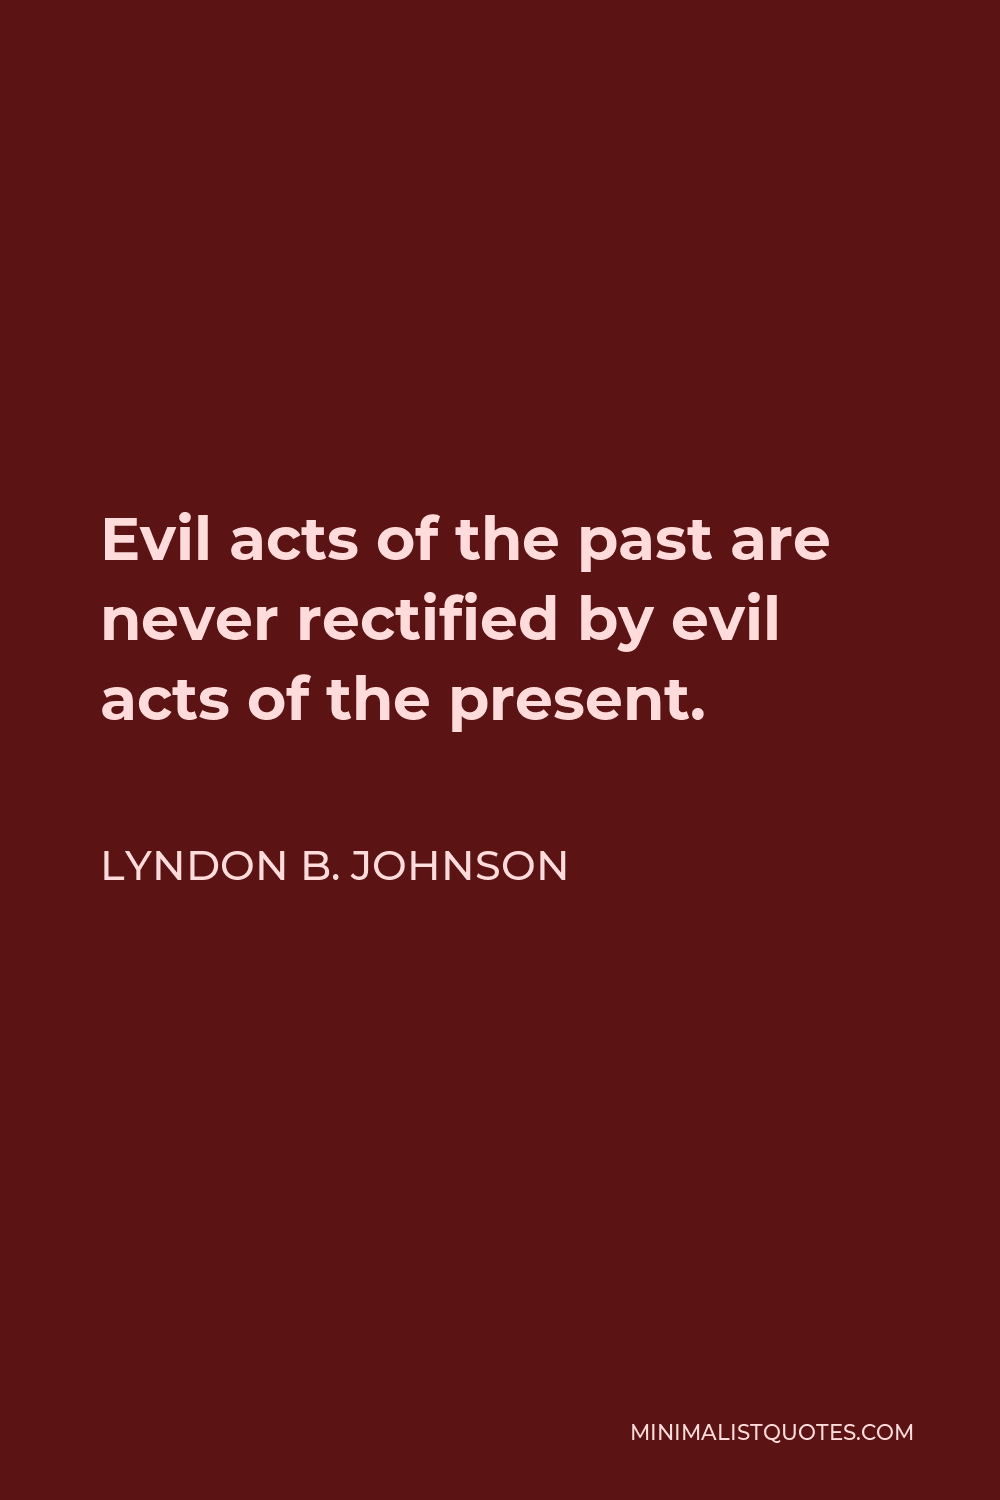 Lyndon B. Johnson Quote - Evil acts of the past are never rectified by evil acts of the present.